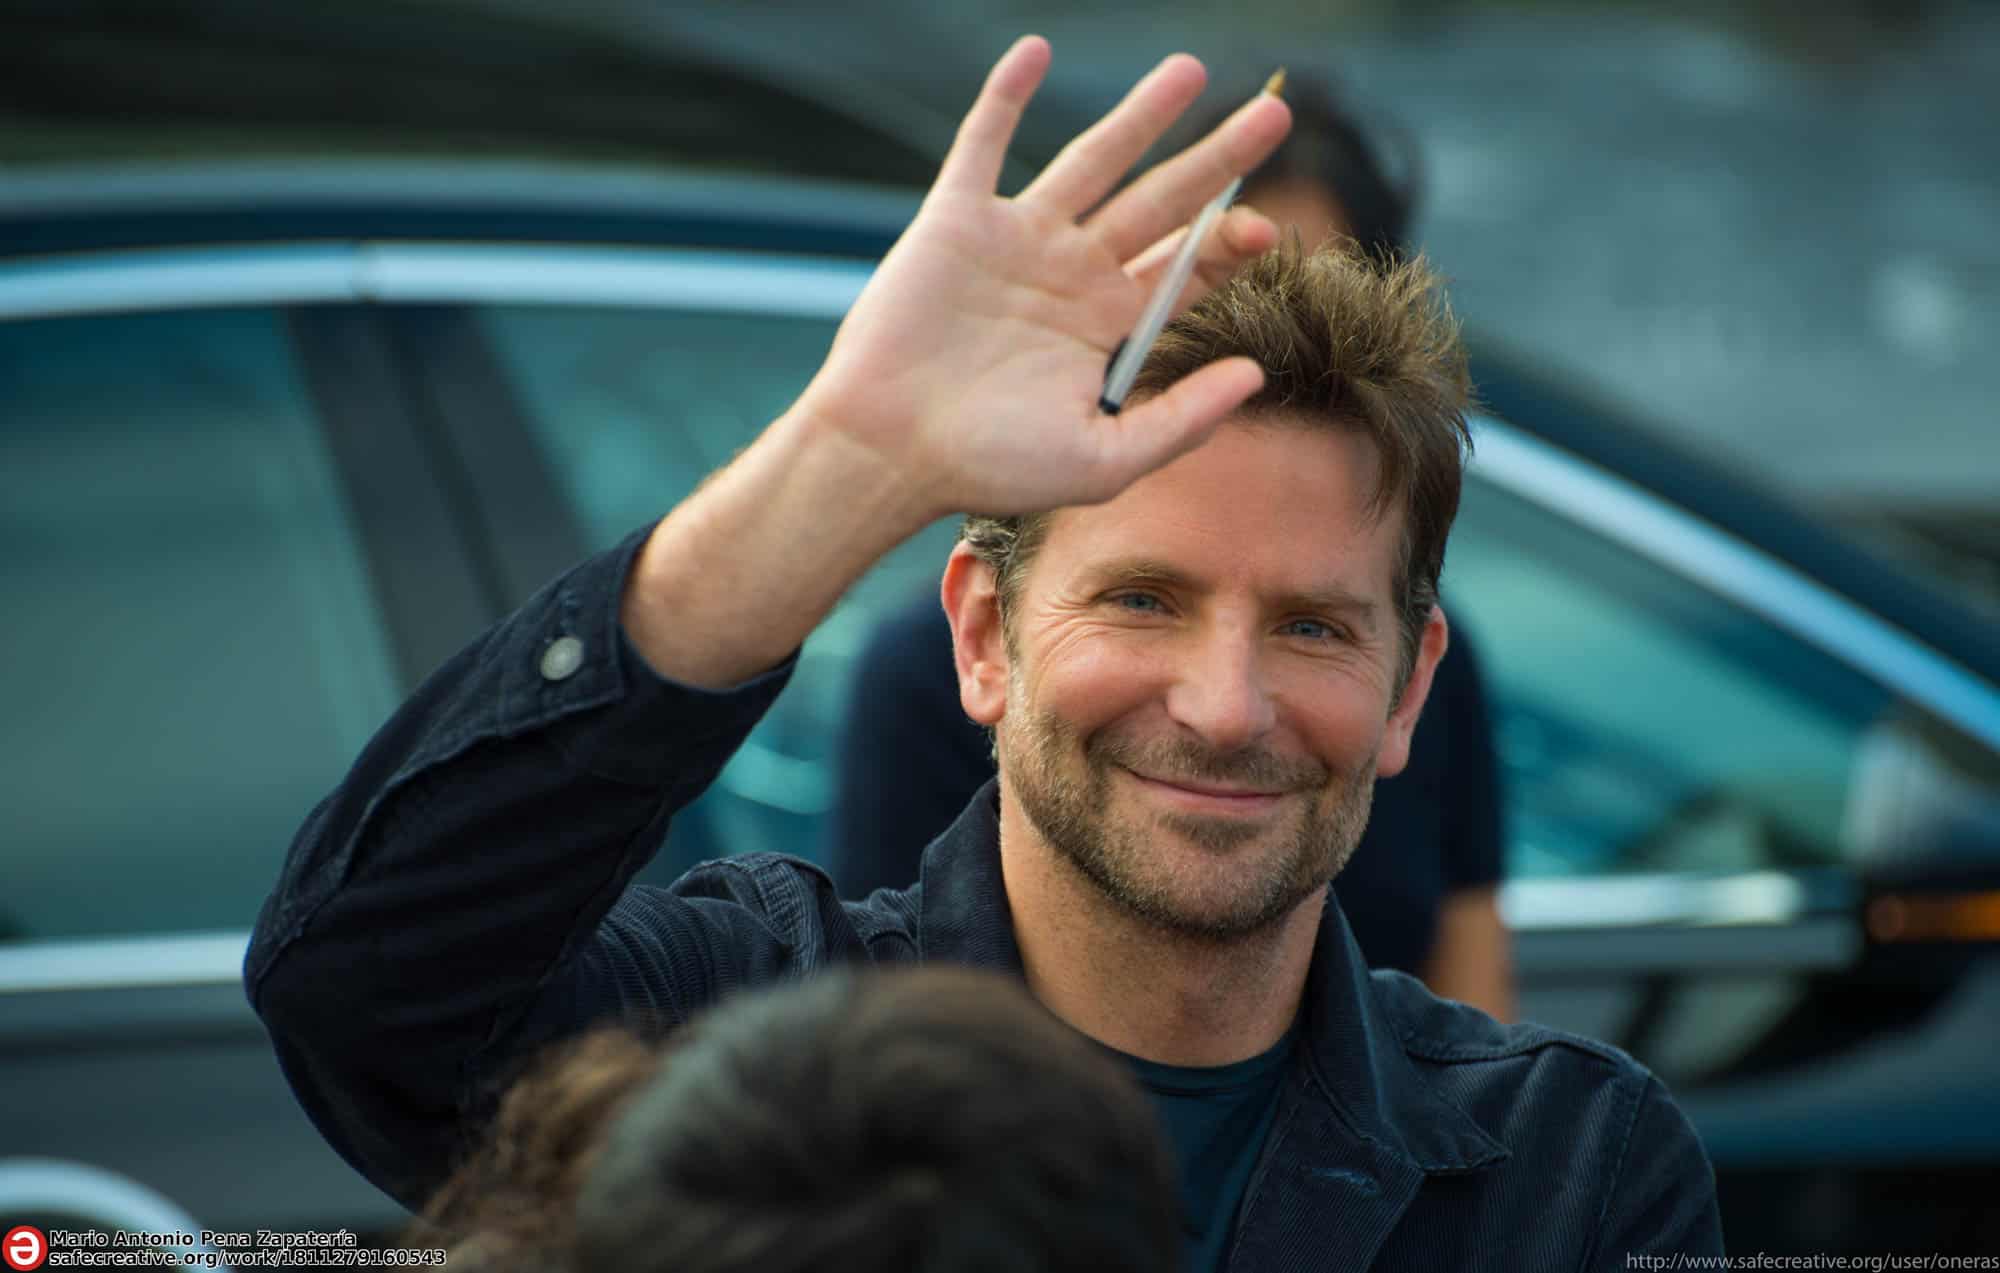 Bradley Cooper with pen in his hand waving to camera